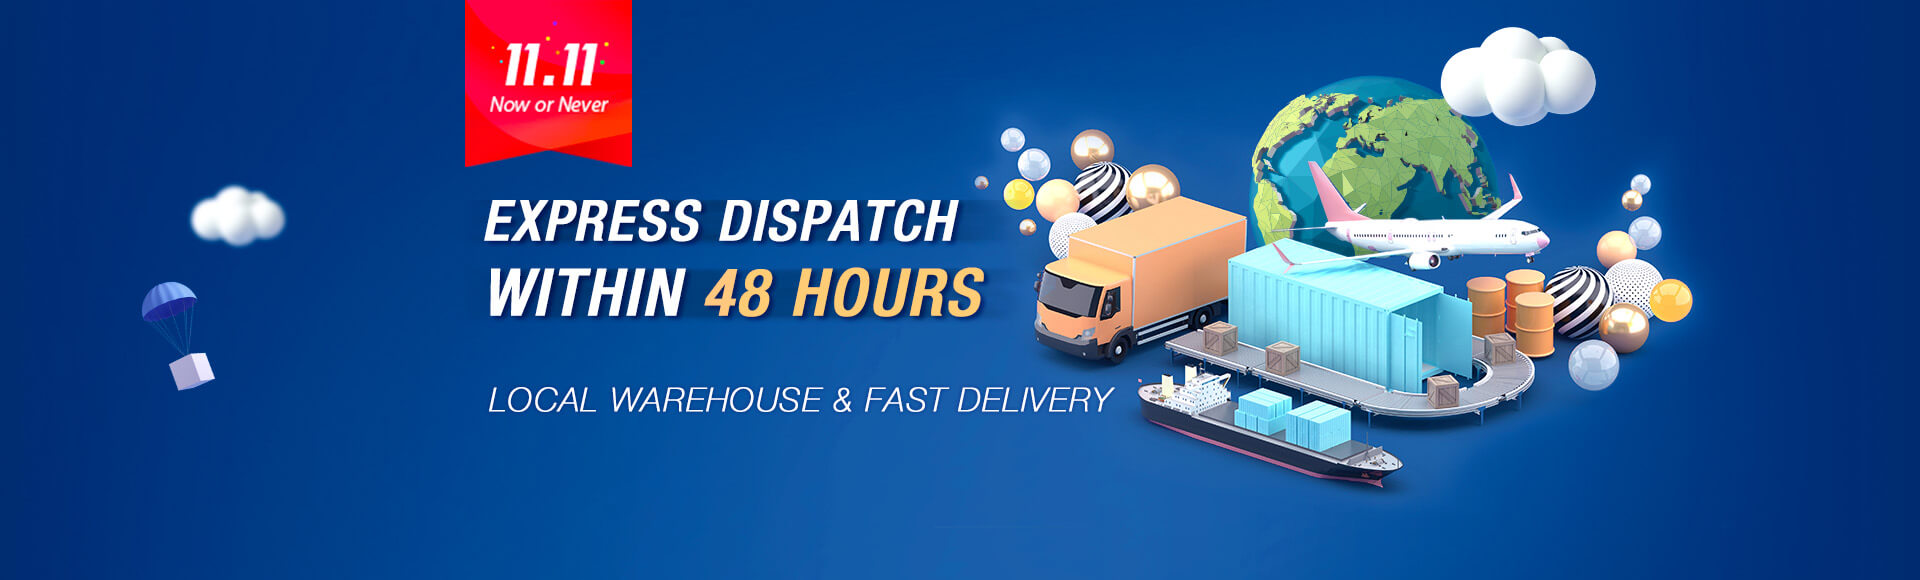 DHgate express Dispatch Within 48 Hours, Local Warehouse & Fast Delivery